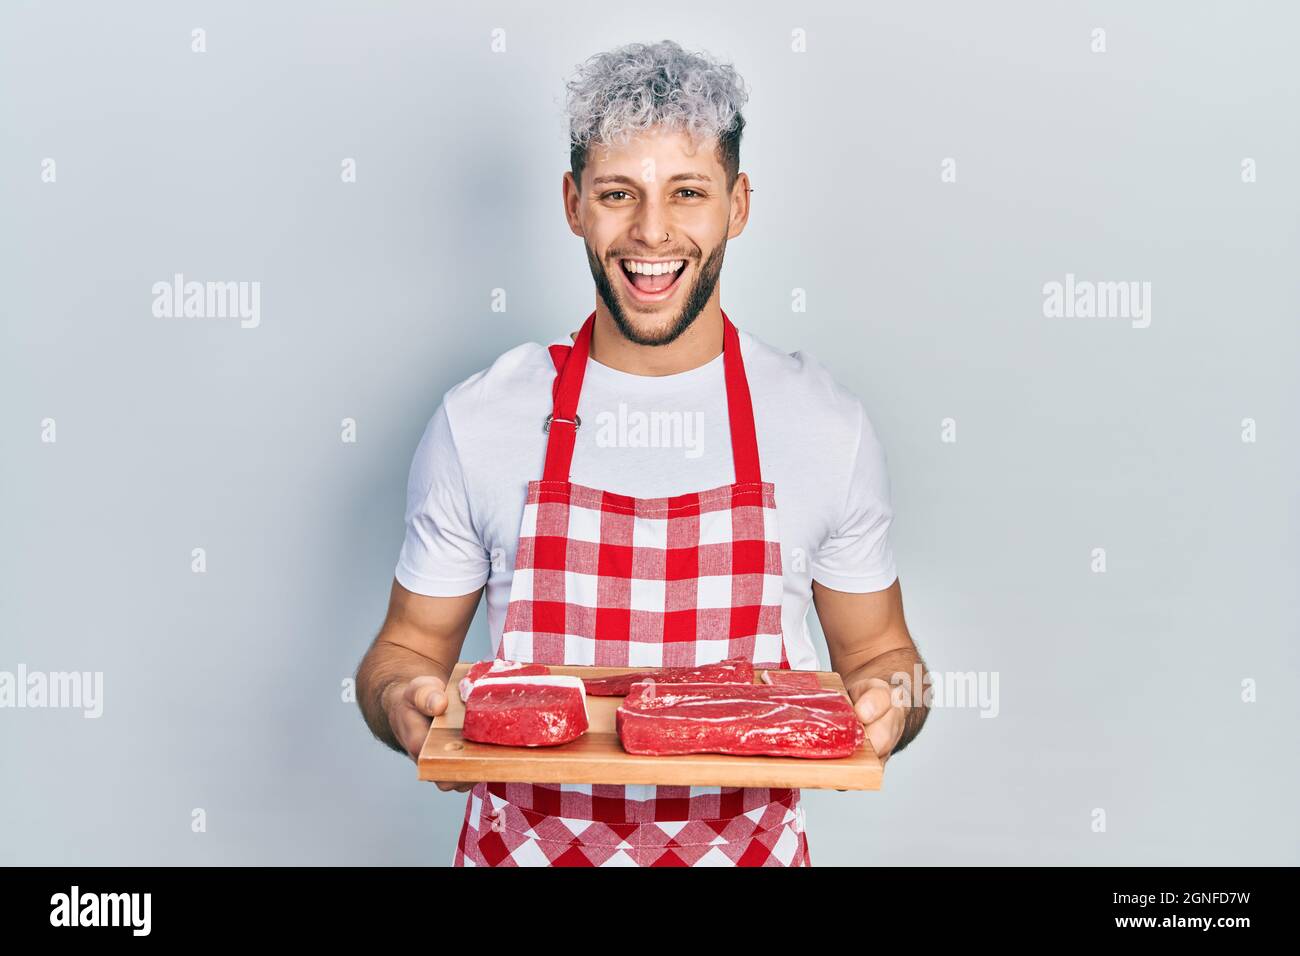 Man Holding Charal Biftecks - Delicious French Meat Editorial